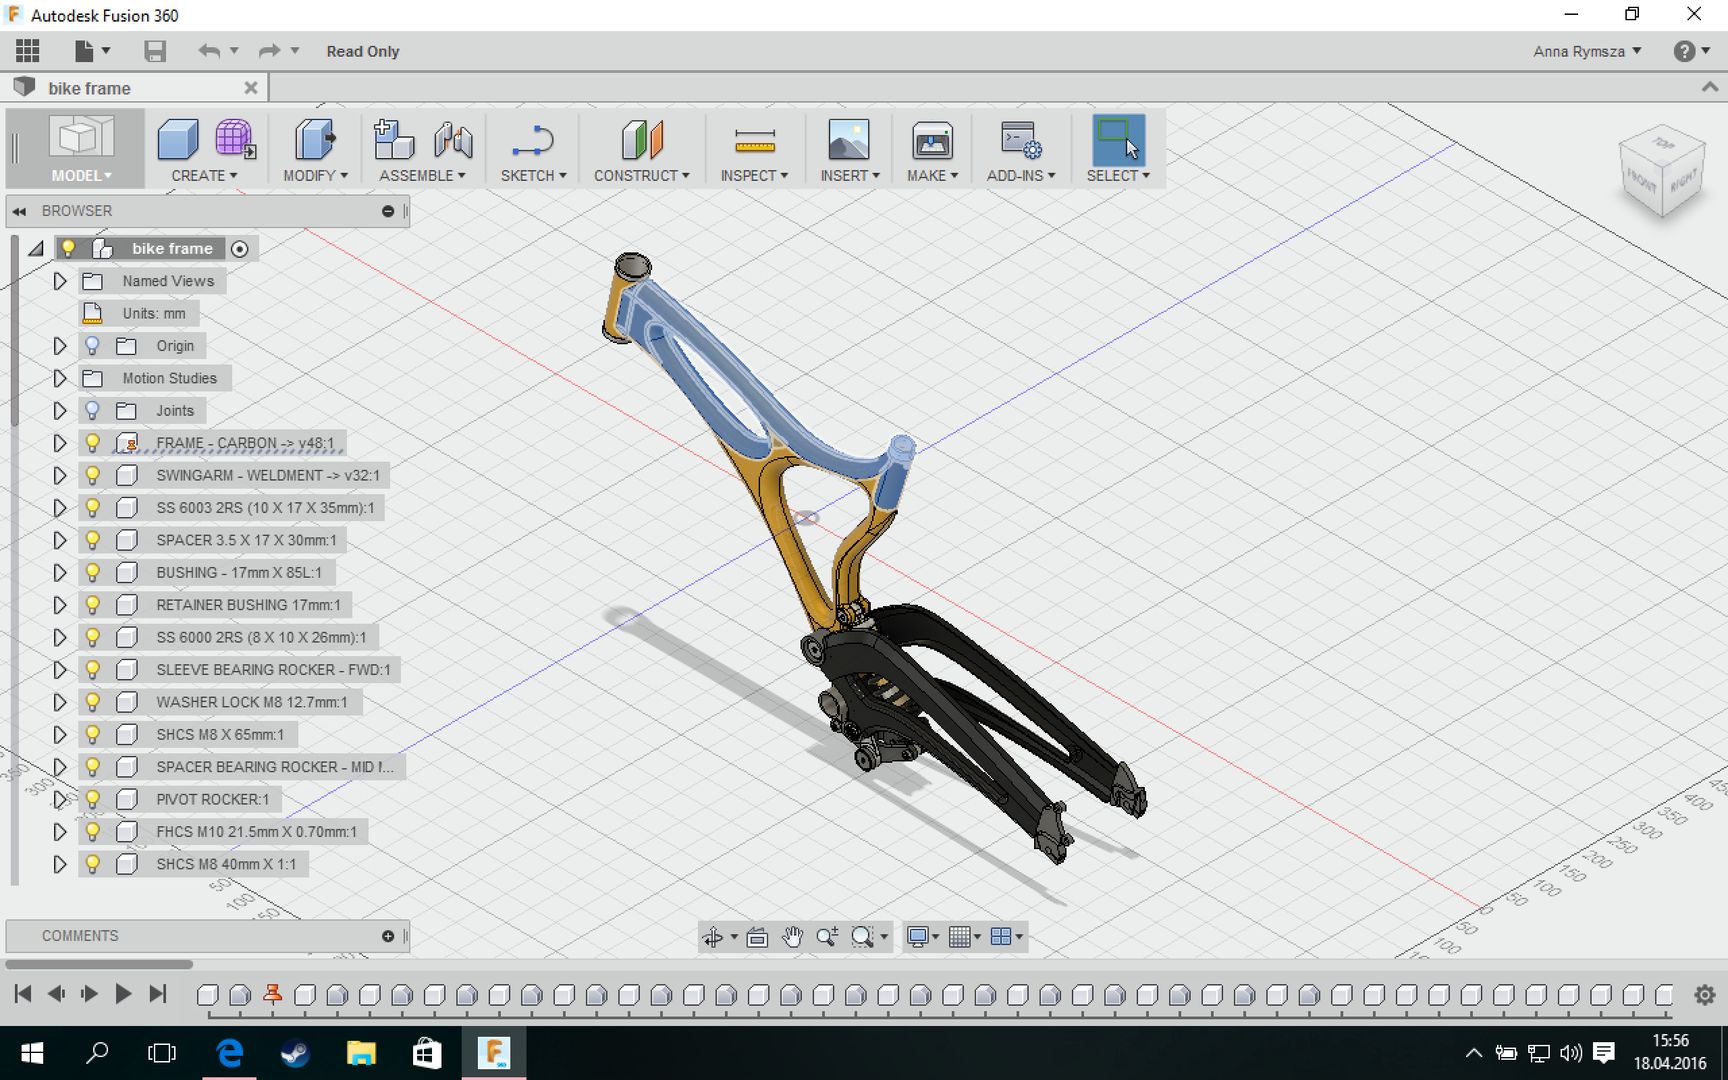 autodesk fusion 360 free personal use